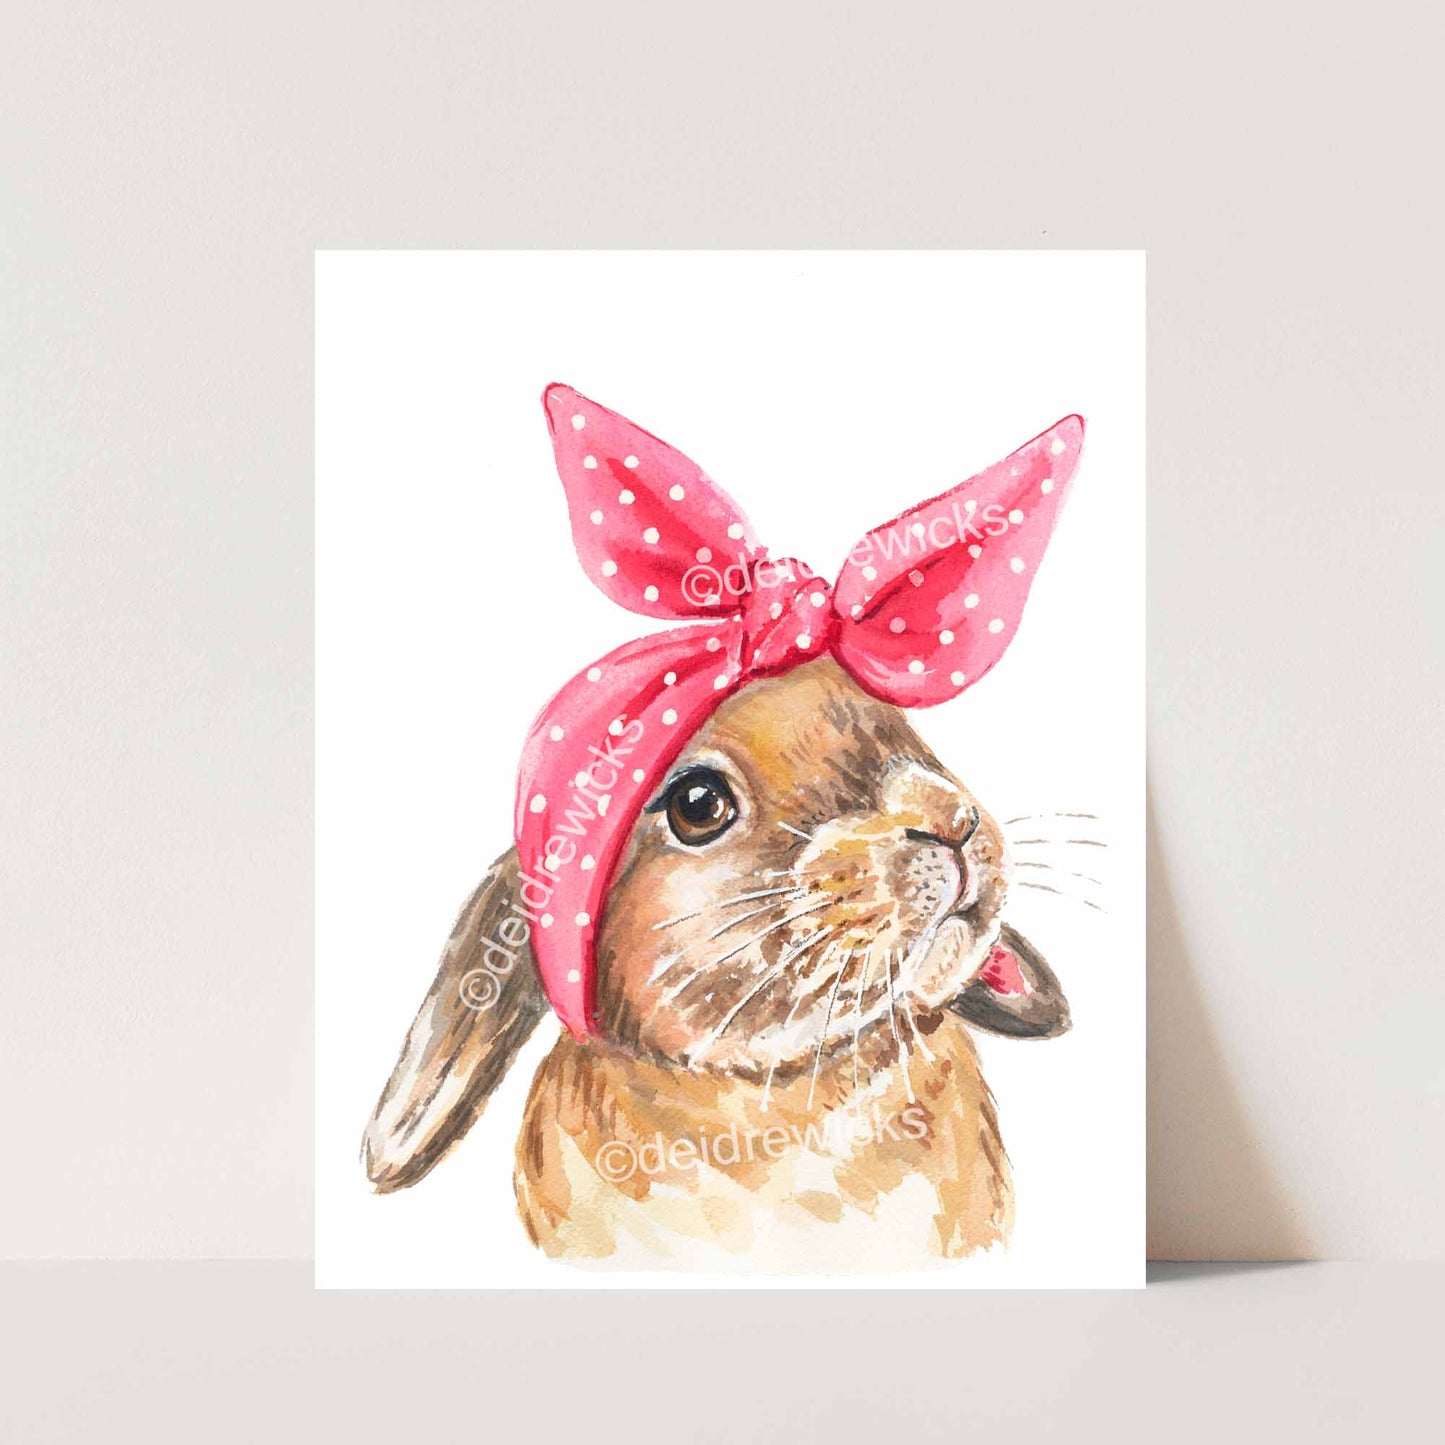 Watercolor print of a rabbit wearing a pink head scarf that looks like bunny ears